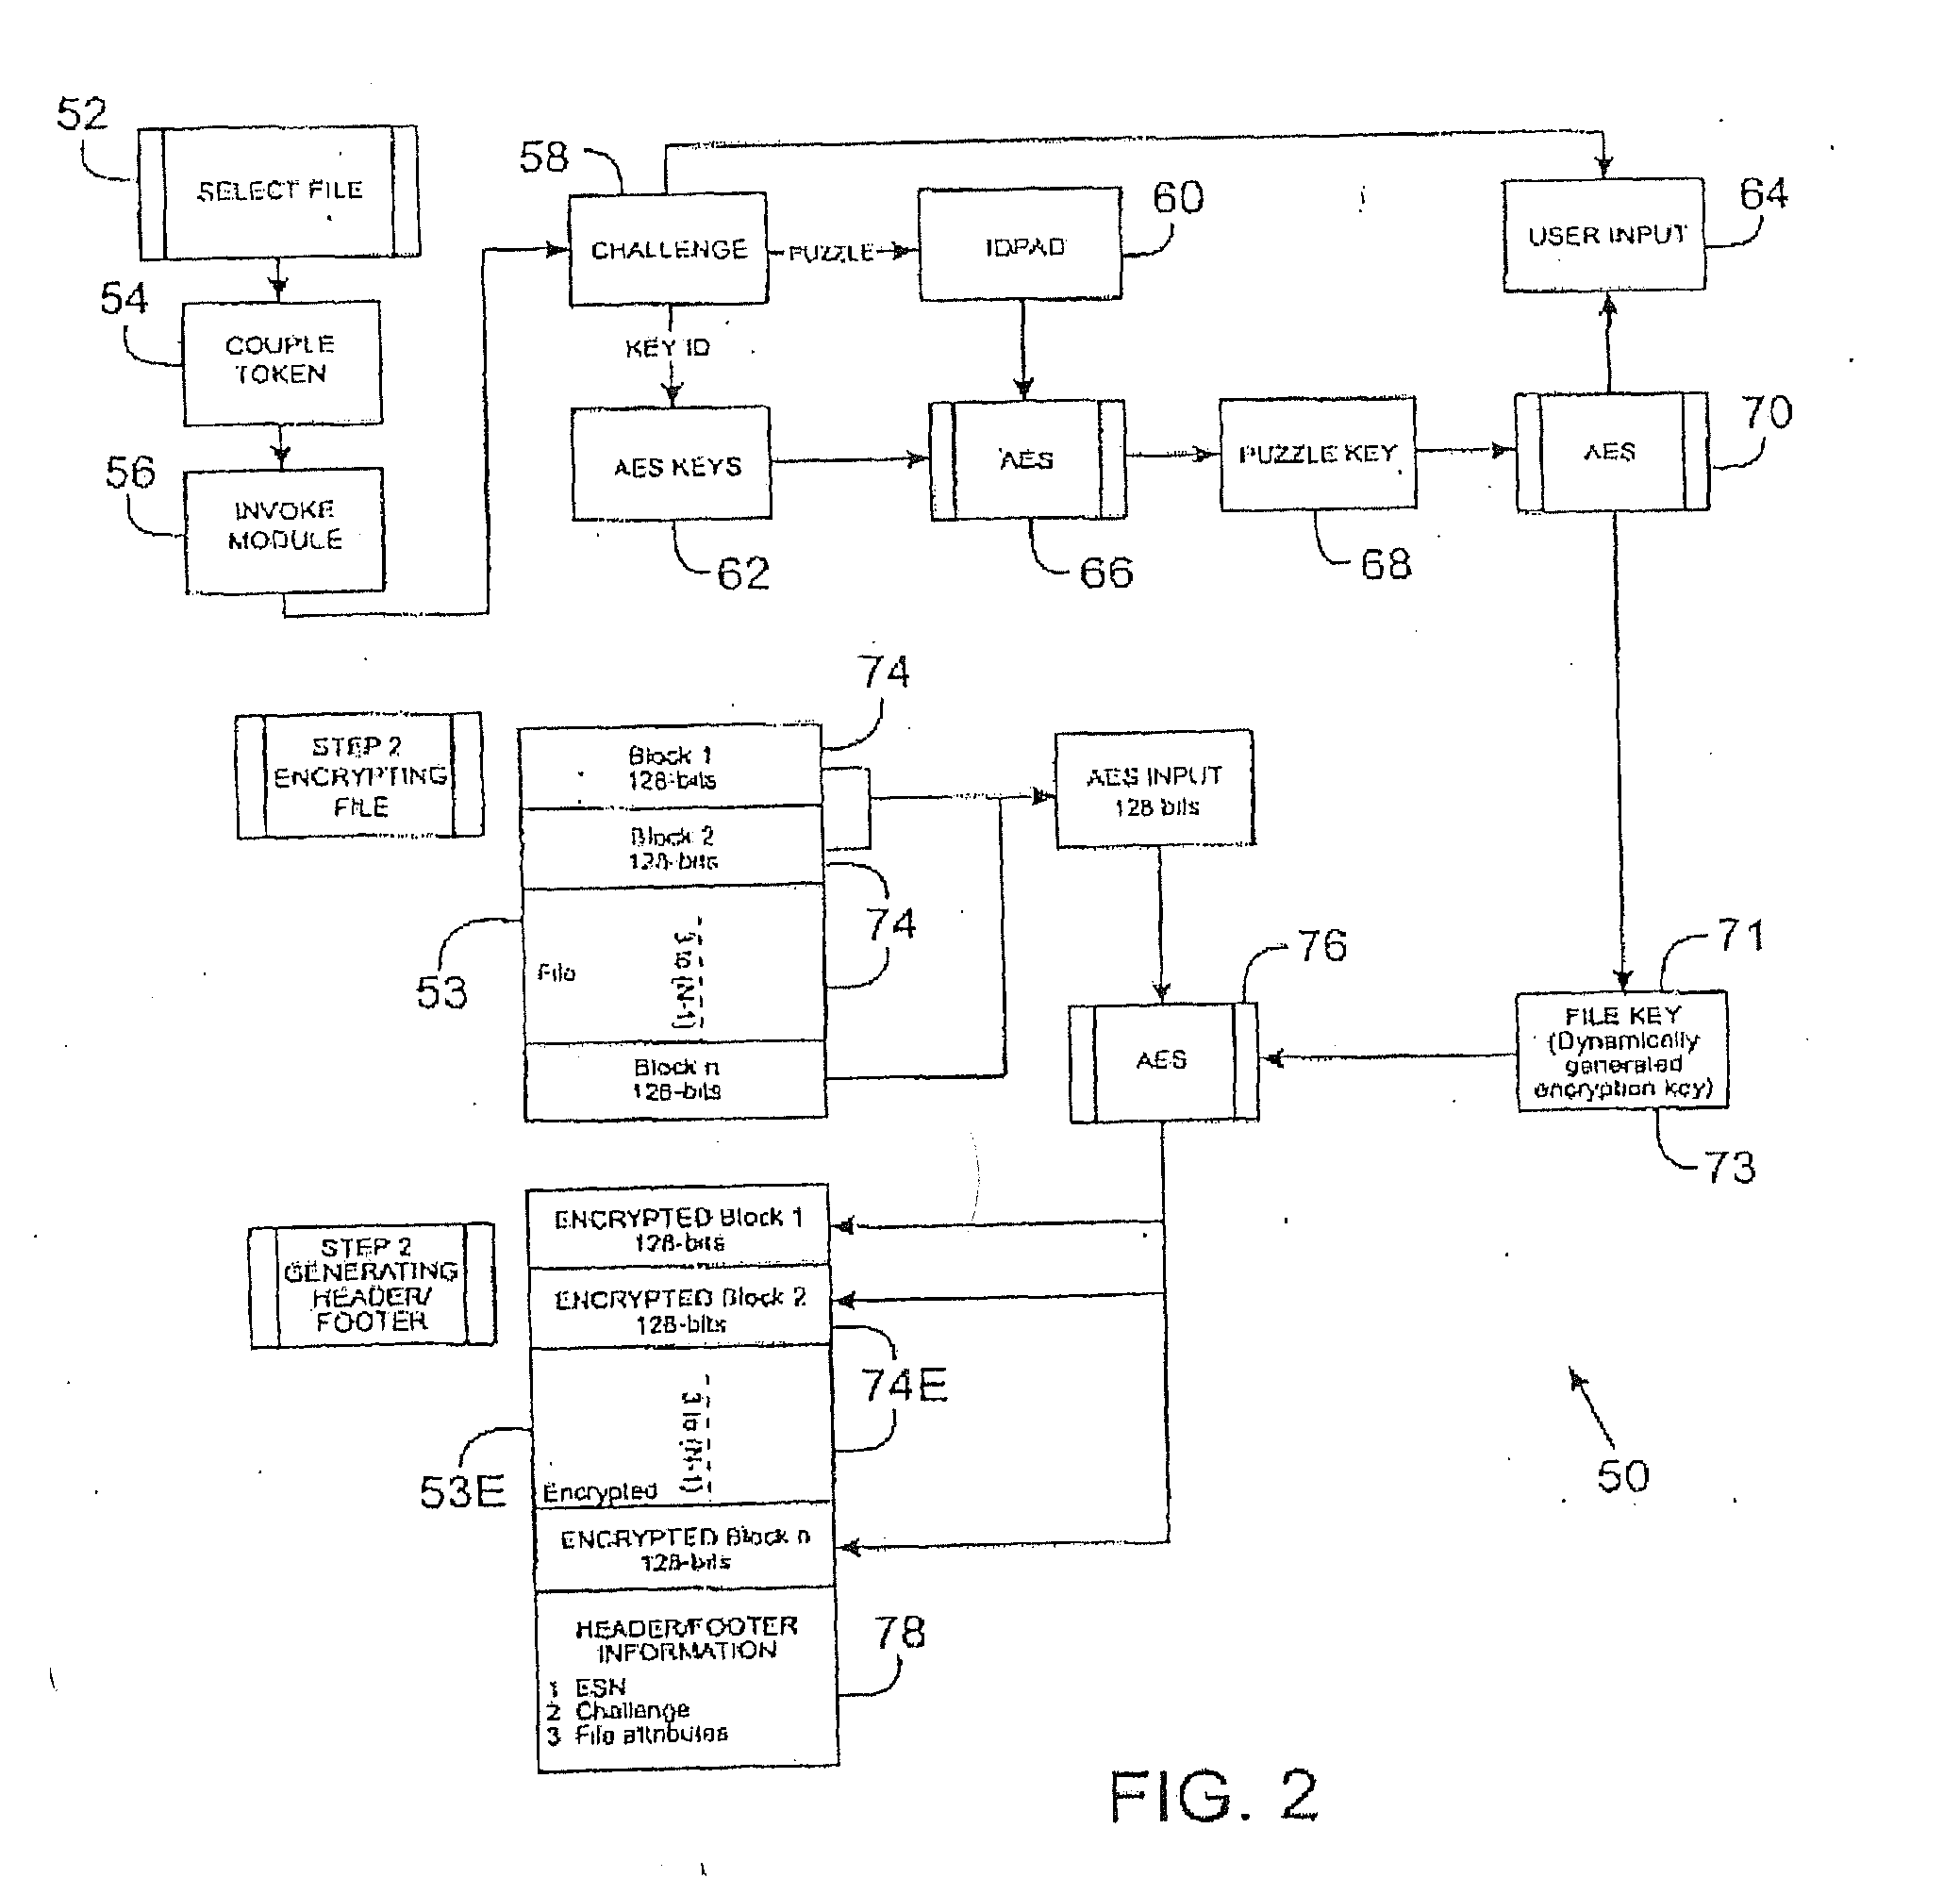 Method and Apparatus for Dynamic Generation of Symmetric Encryption Keys and Exchange of Dynamic Symmetric Key Infrastructure